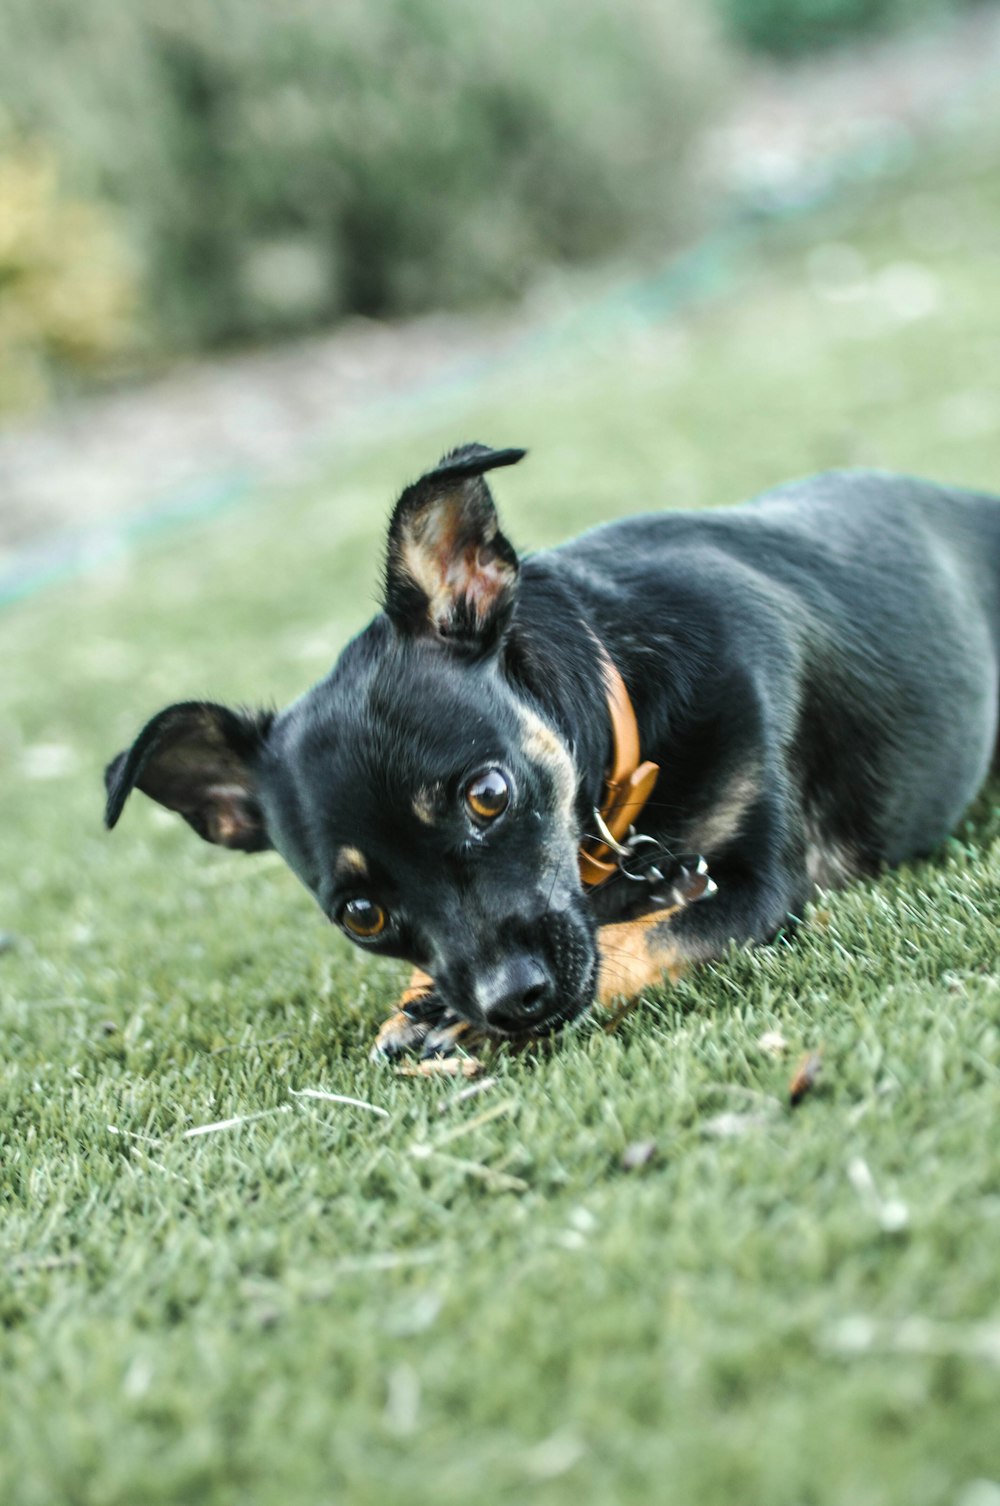 black and tan short coat small dog on green grass field during daytime